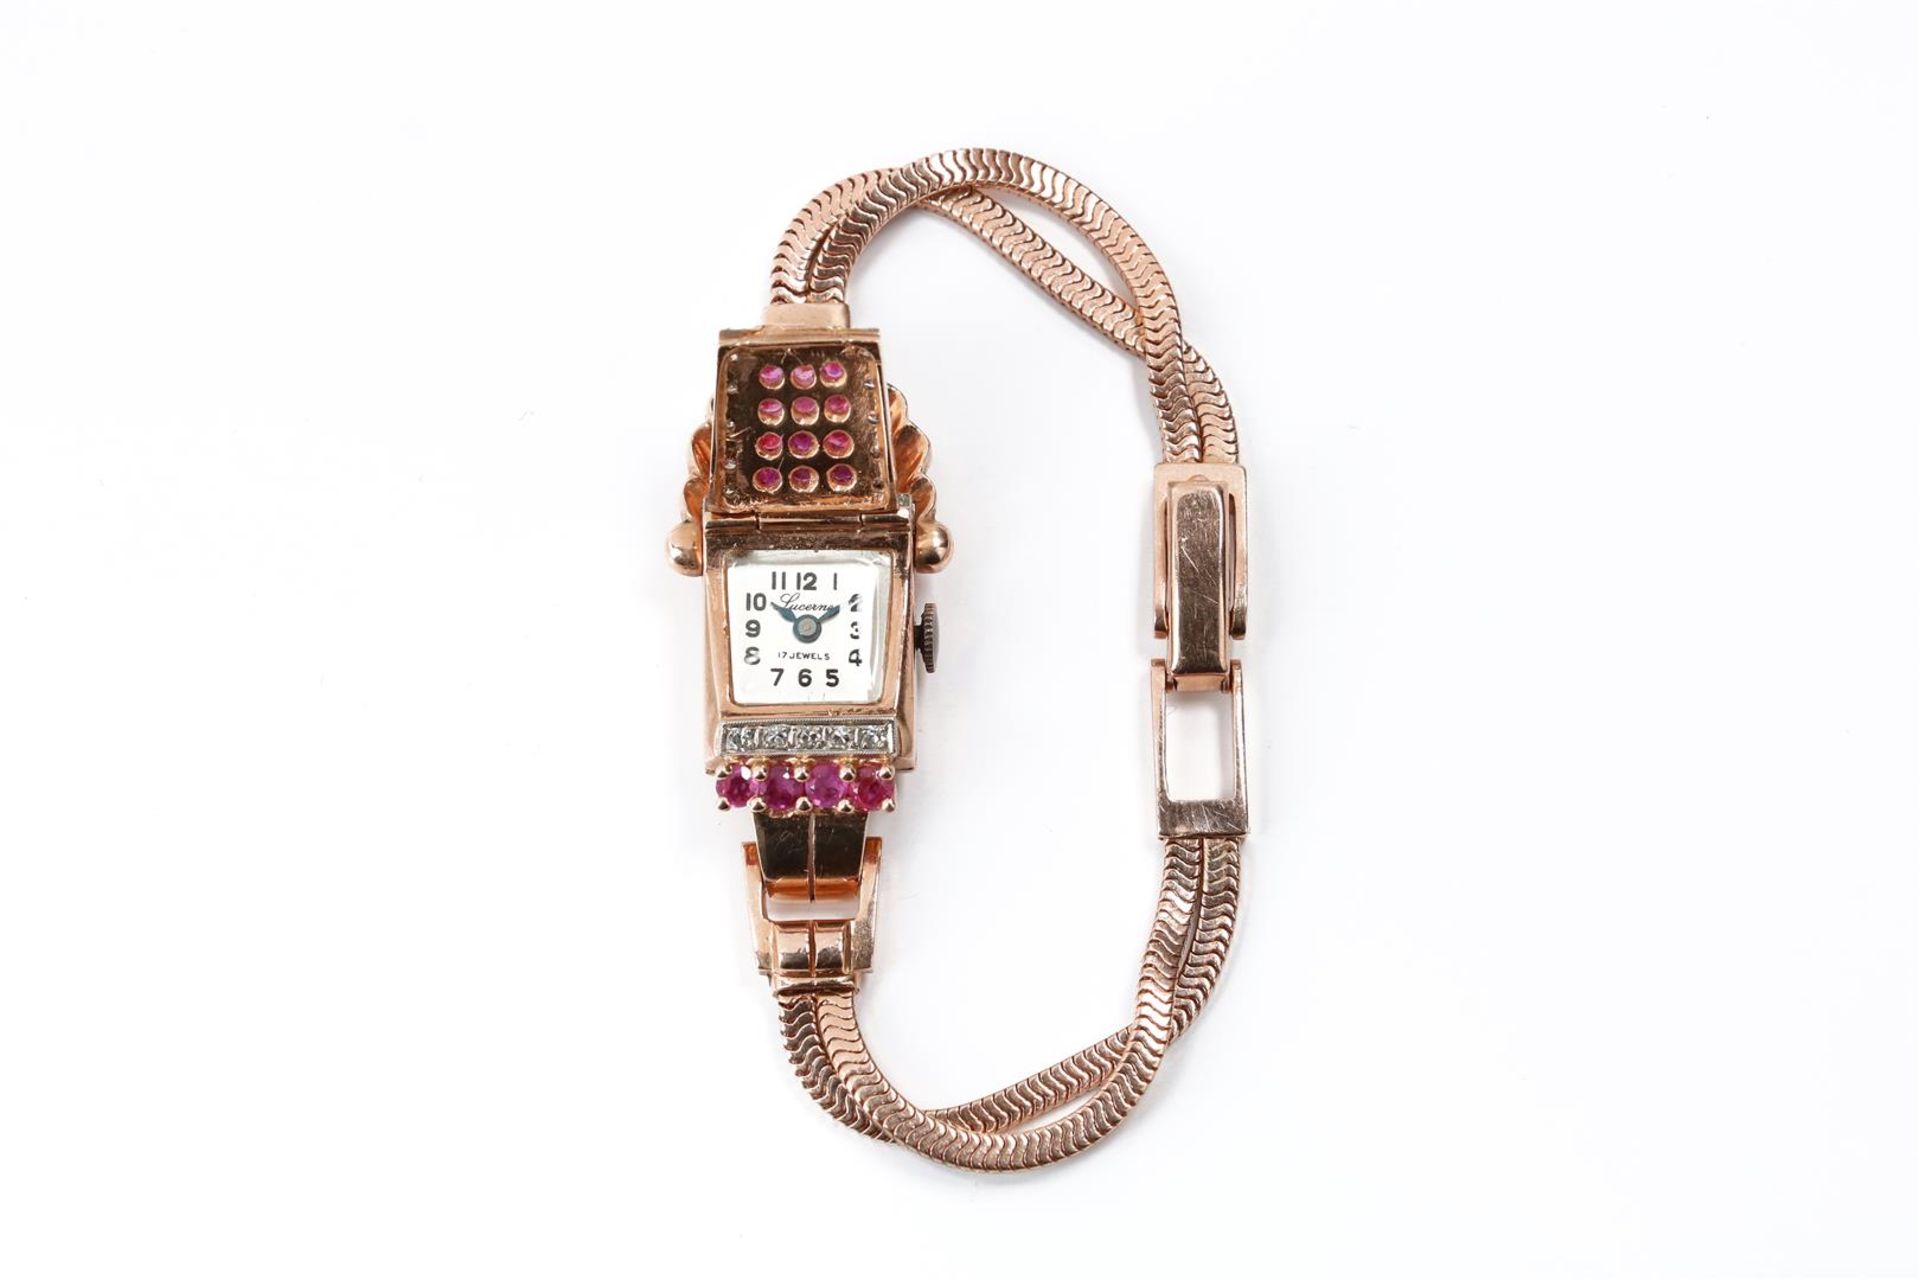 A Lucerne retro 14-kt rose and white gold ladies cocktail watch, set with pink sapphires, in total a - Image 5 of 7